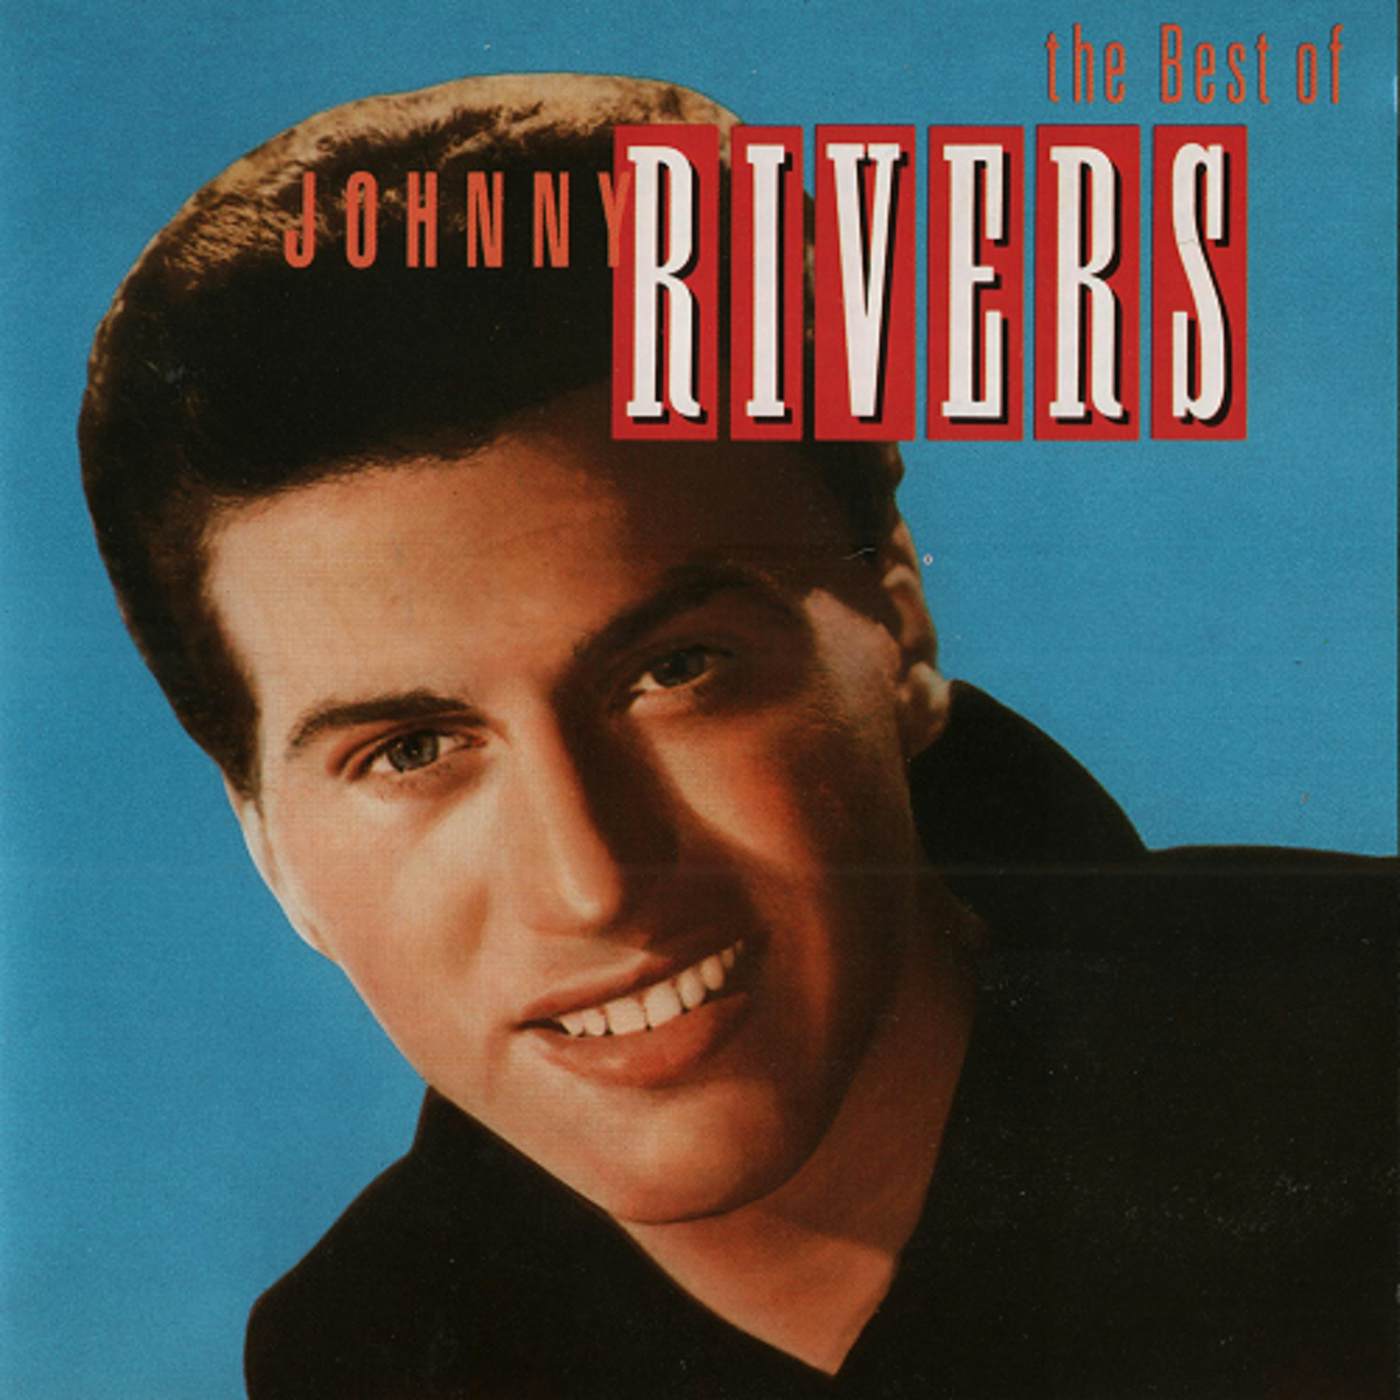 BEST OF JOHNNY RIVERS - GREATEST HITS (180G/LIMITED EDITION/GATEFOLD COVER) Vinyl Record